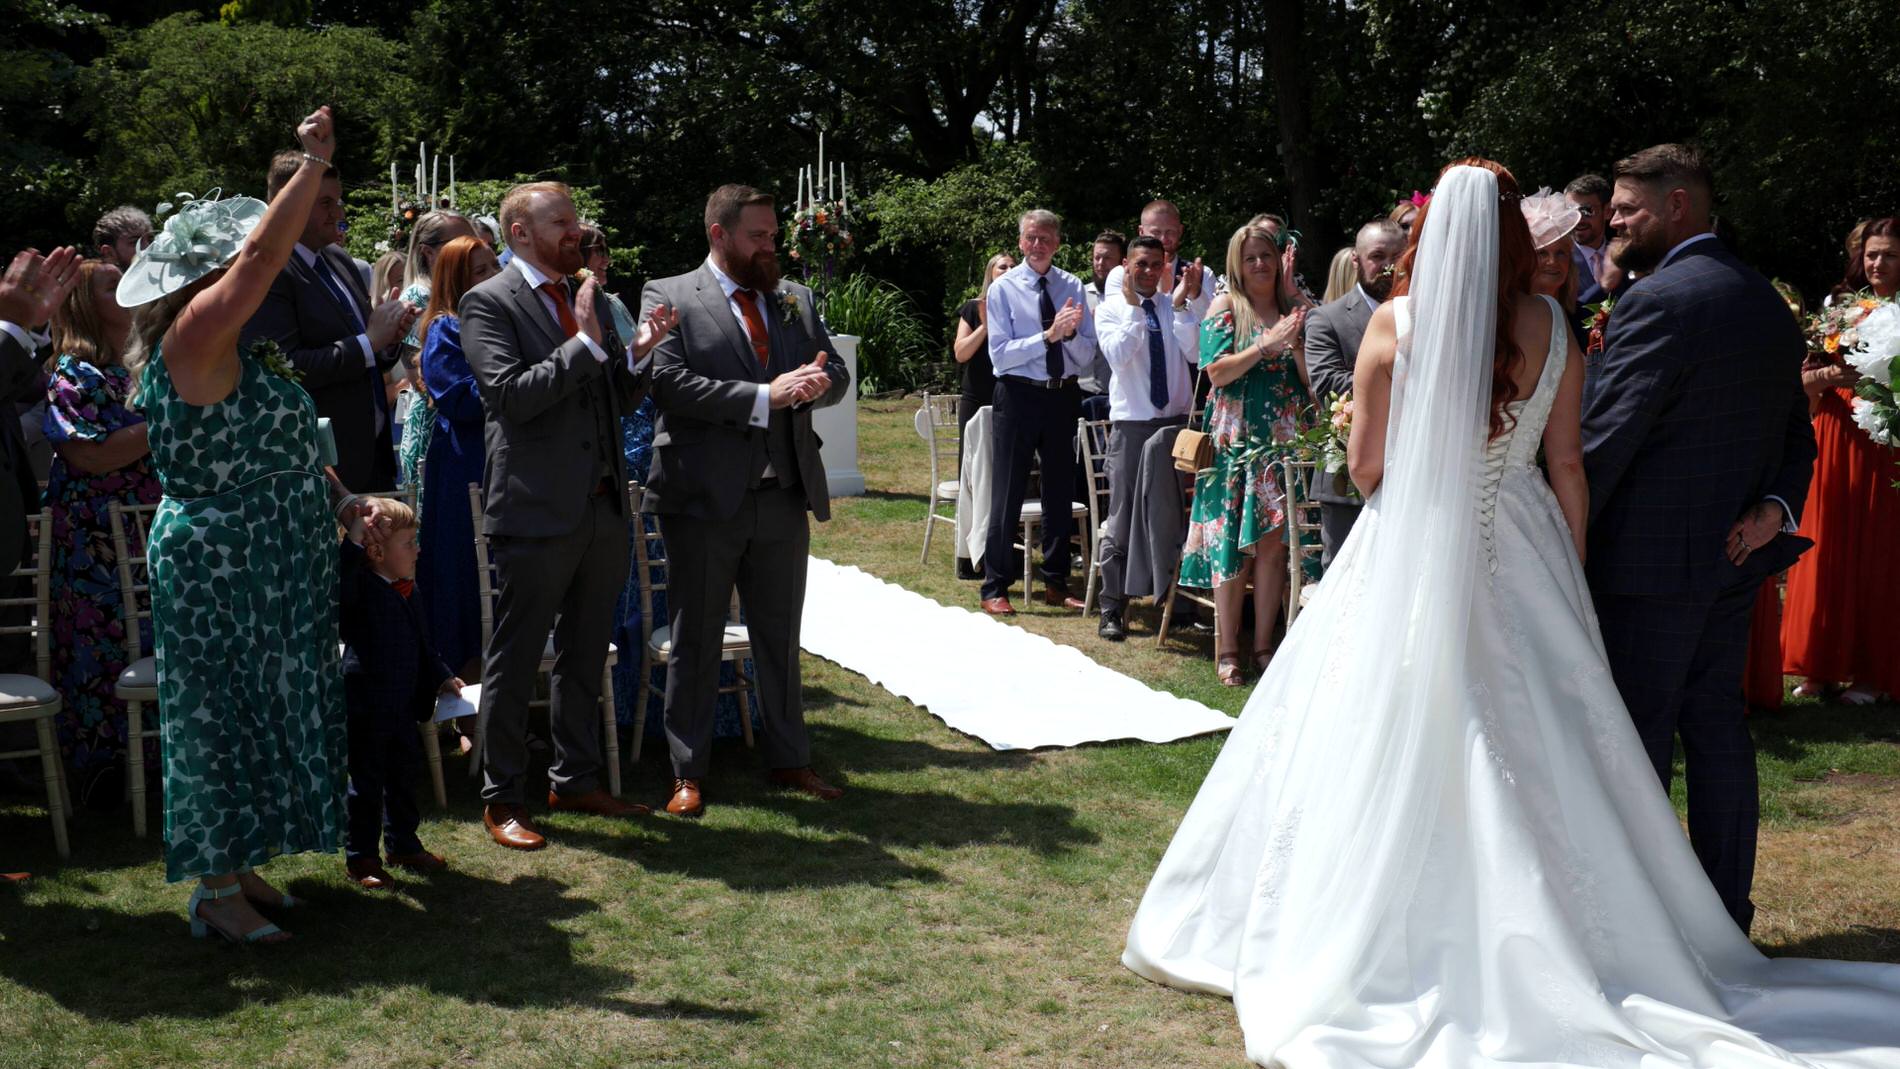 guests cheer as the couple walk down the aisle at Nunsmere hall